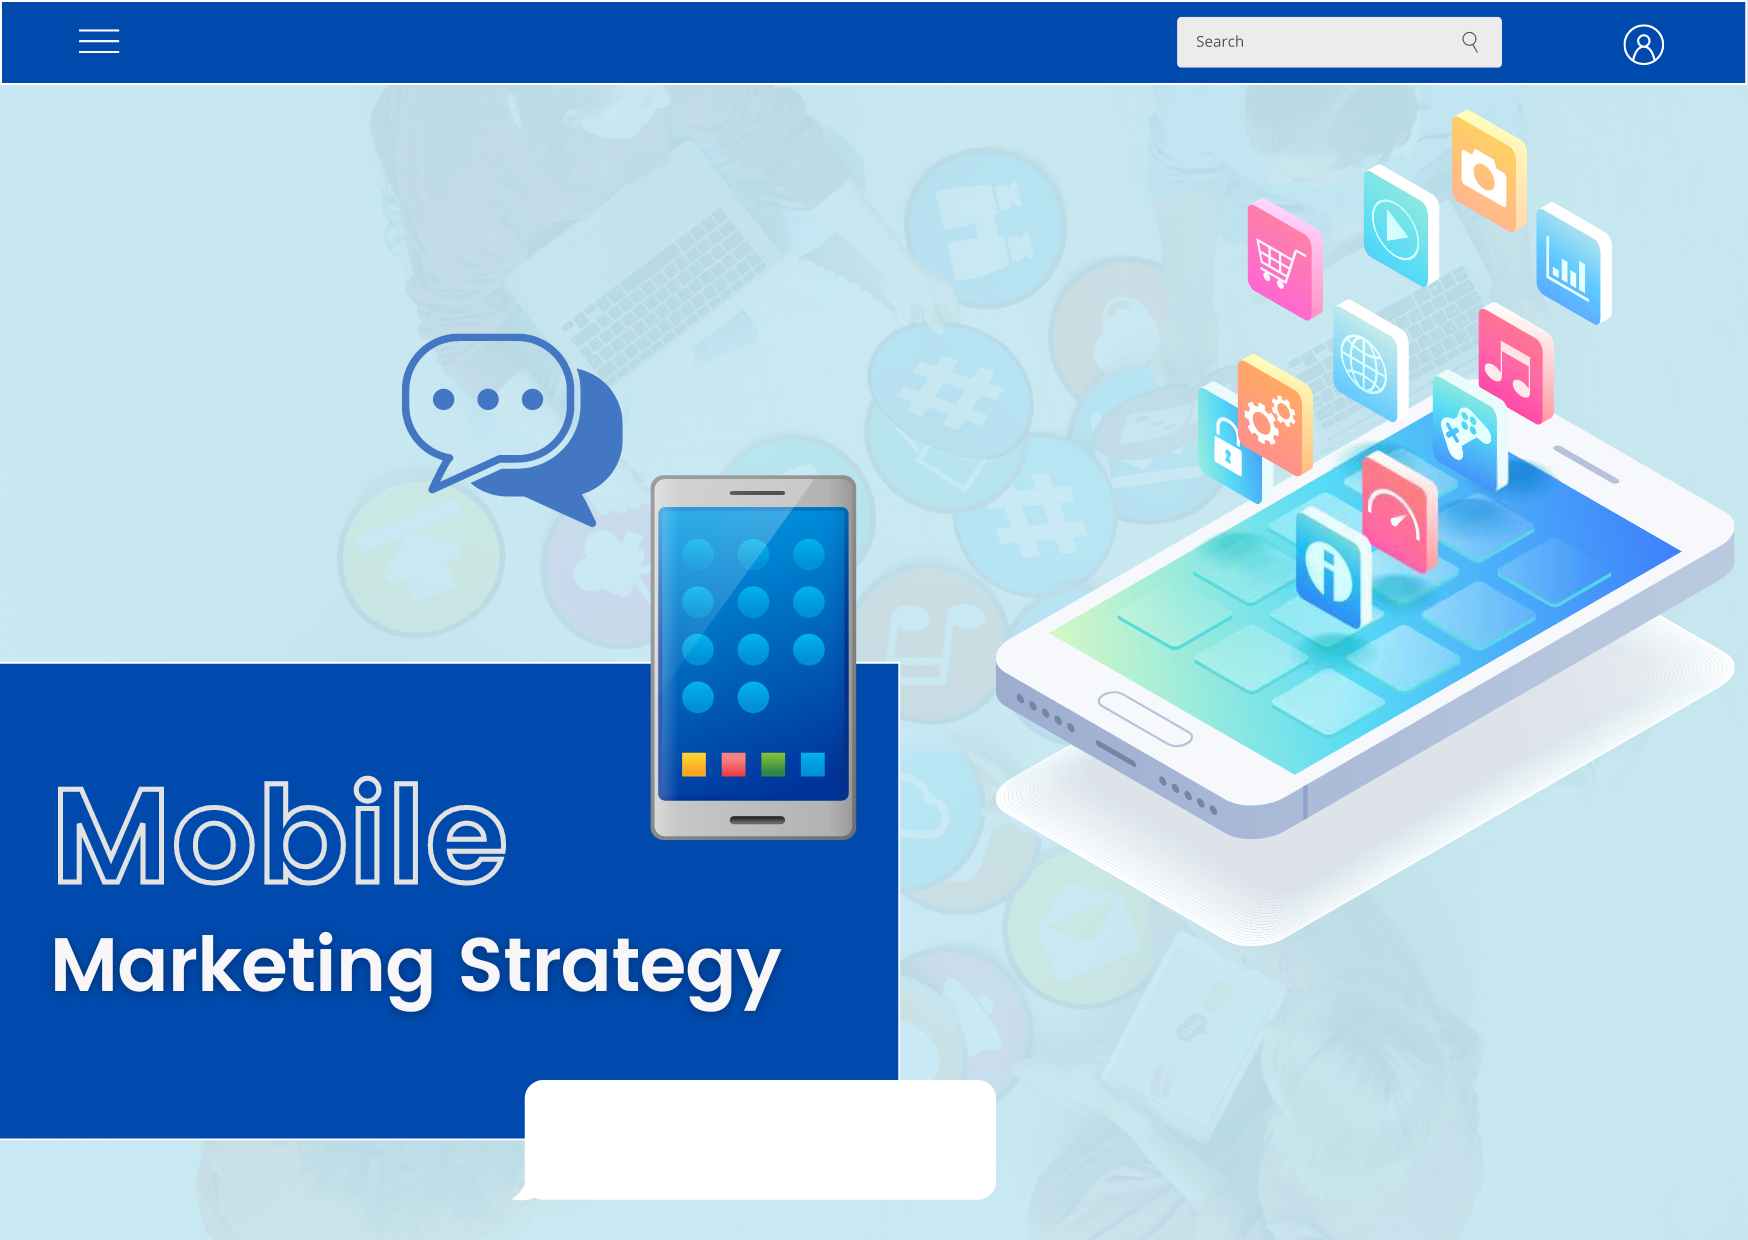 Mobile Marketing Strategy